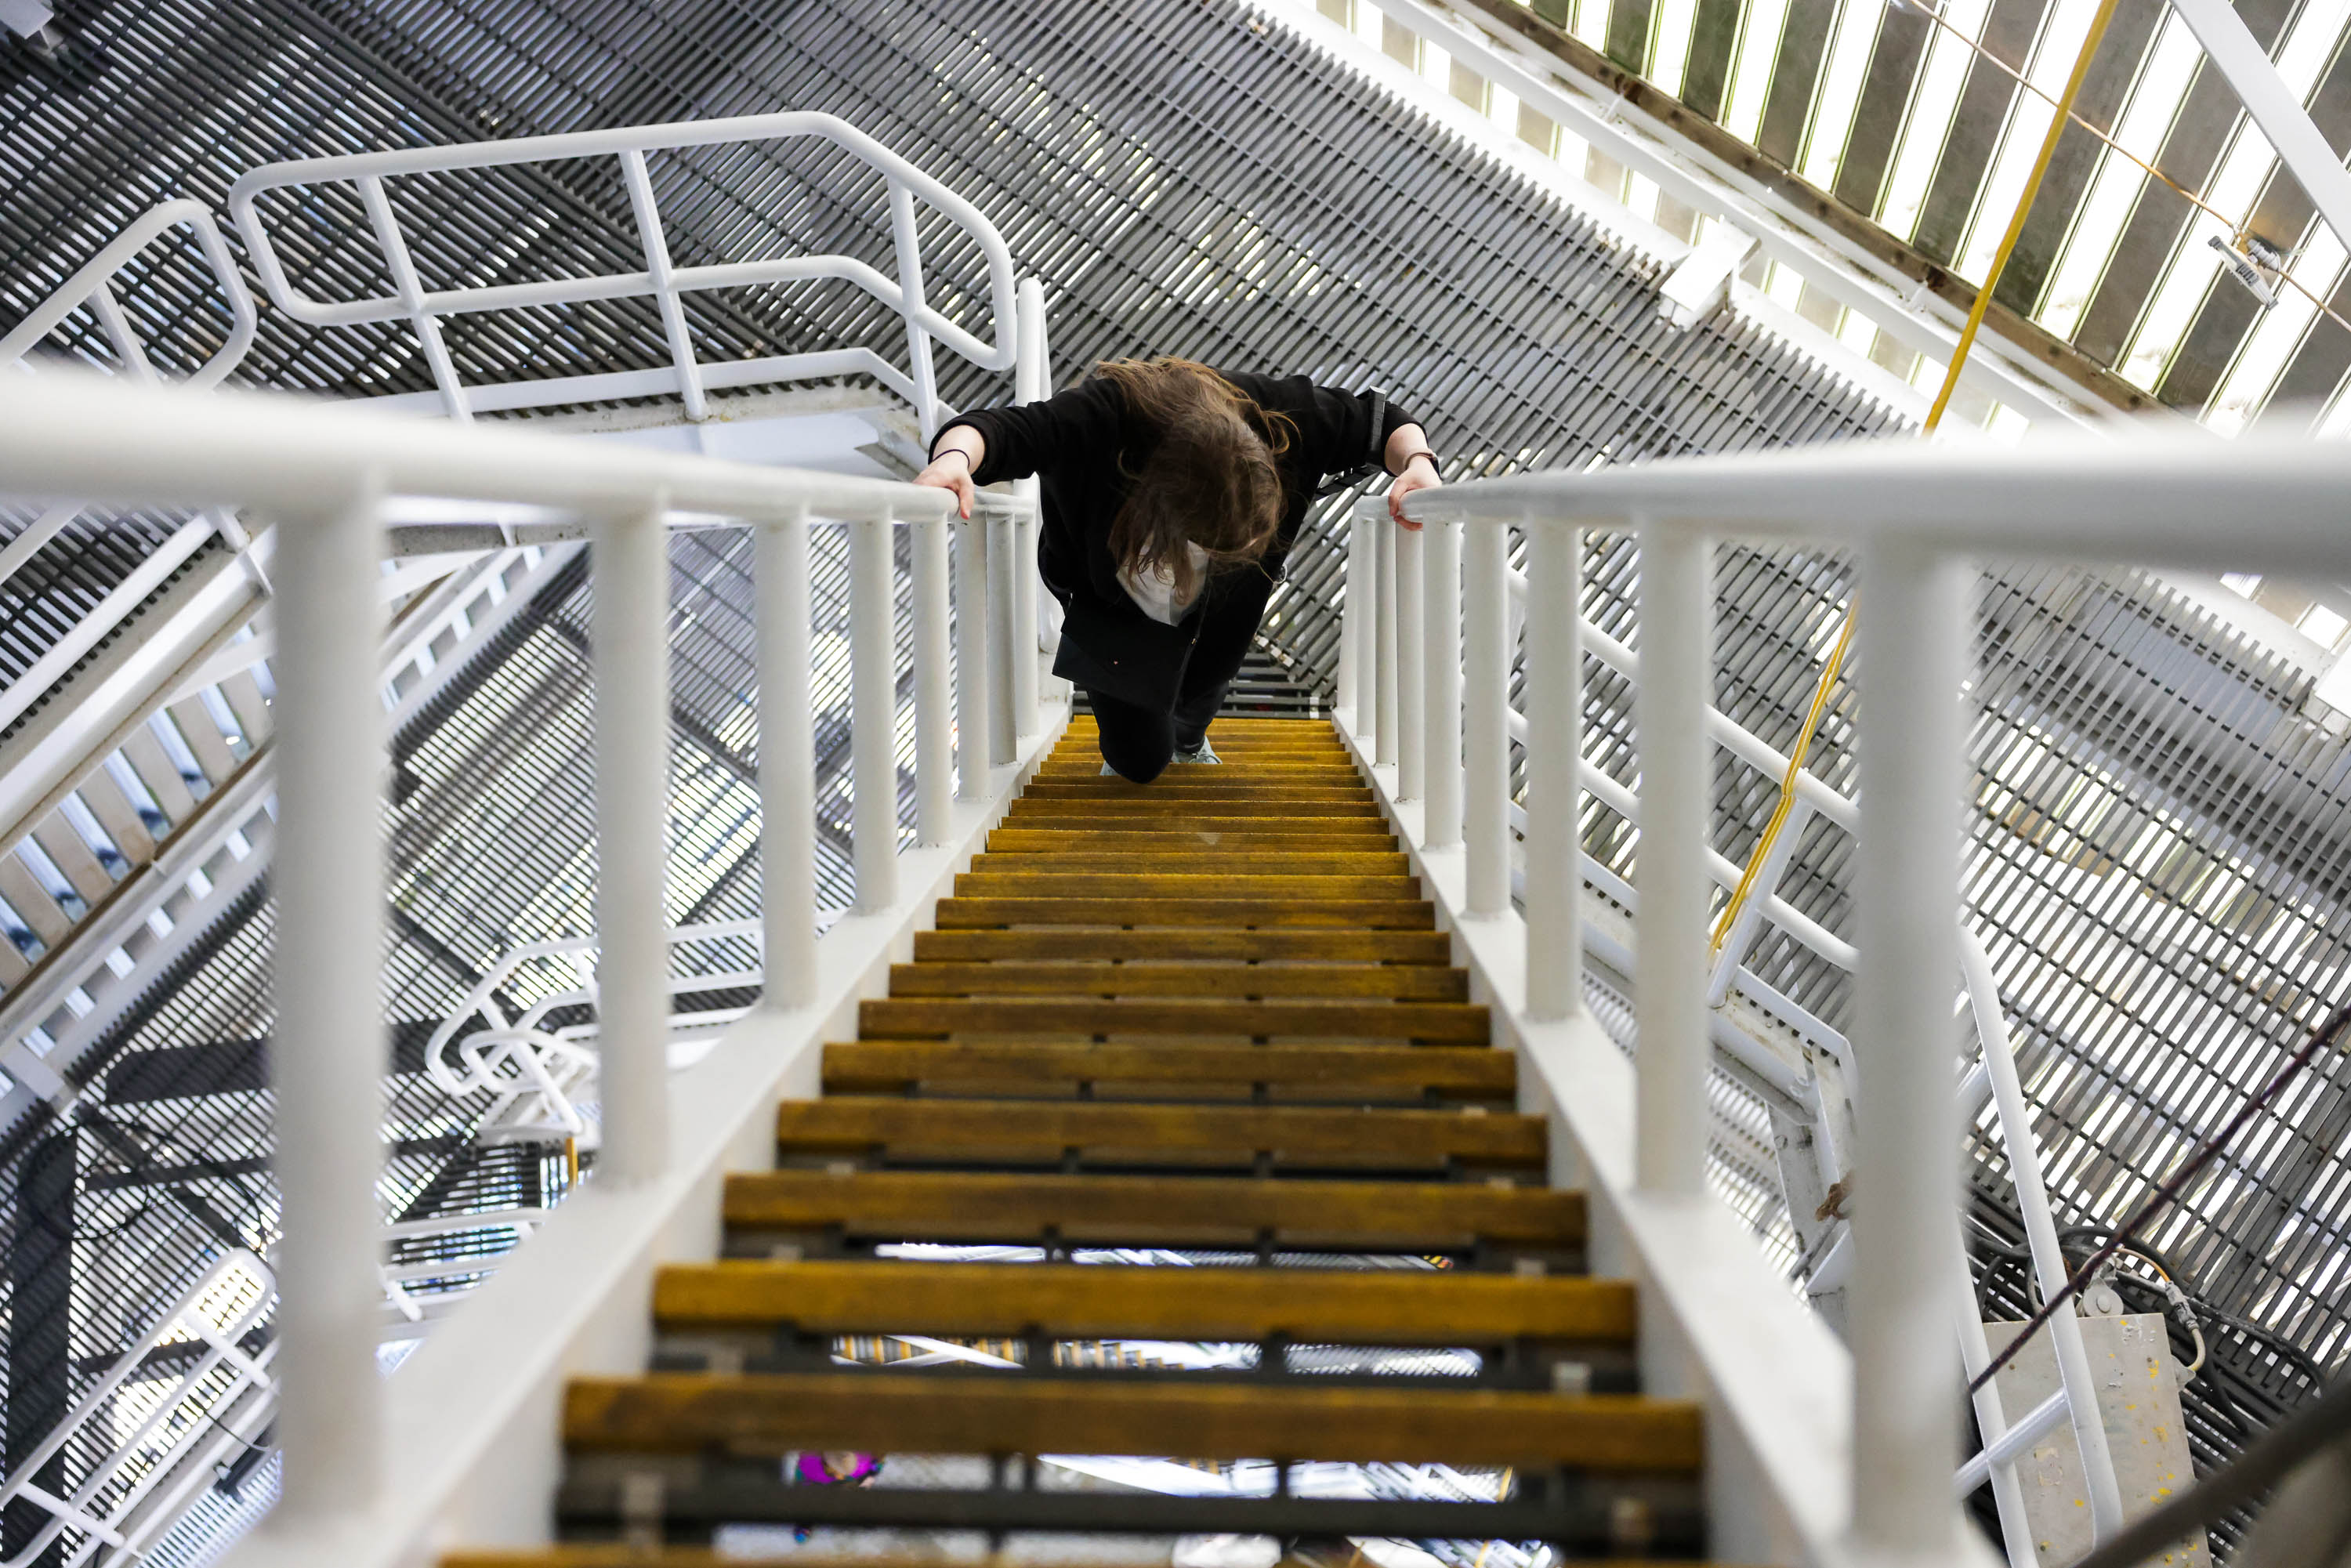 A person is leaning over a white railing at the top of an industrial staircase, looking downwards.